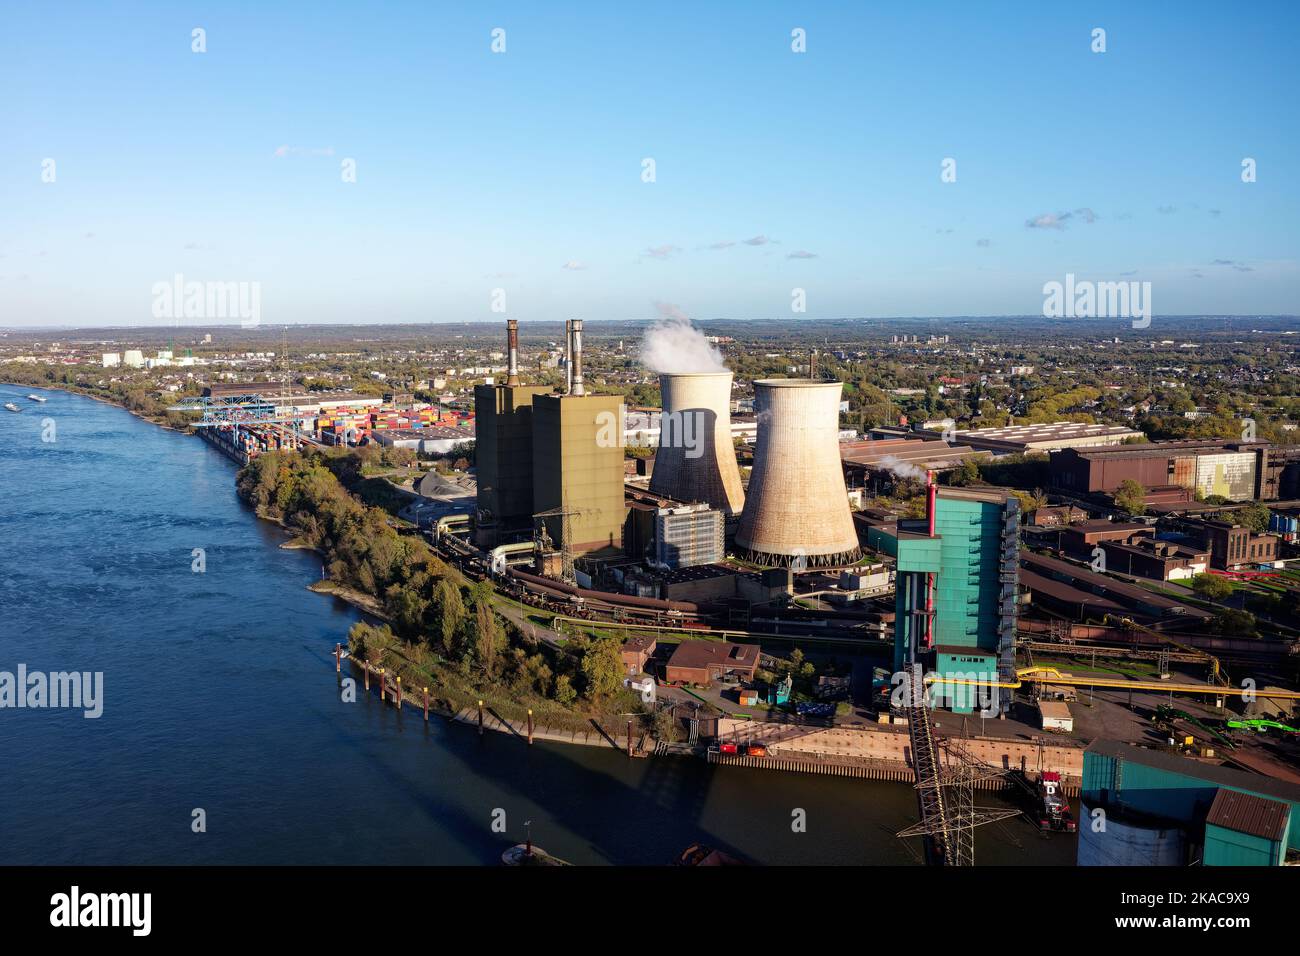 Gas-fired power plant in Duisburg, consisting of 2 units with 320 megawatts electrical output. It uses blast furnace gas, coke oven gas or natural gas Stock Photo